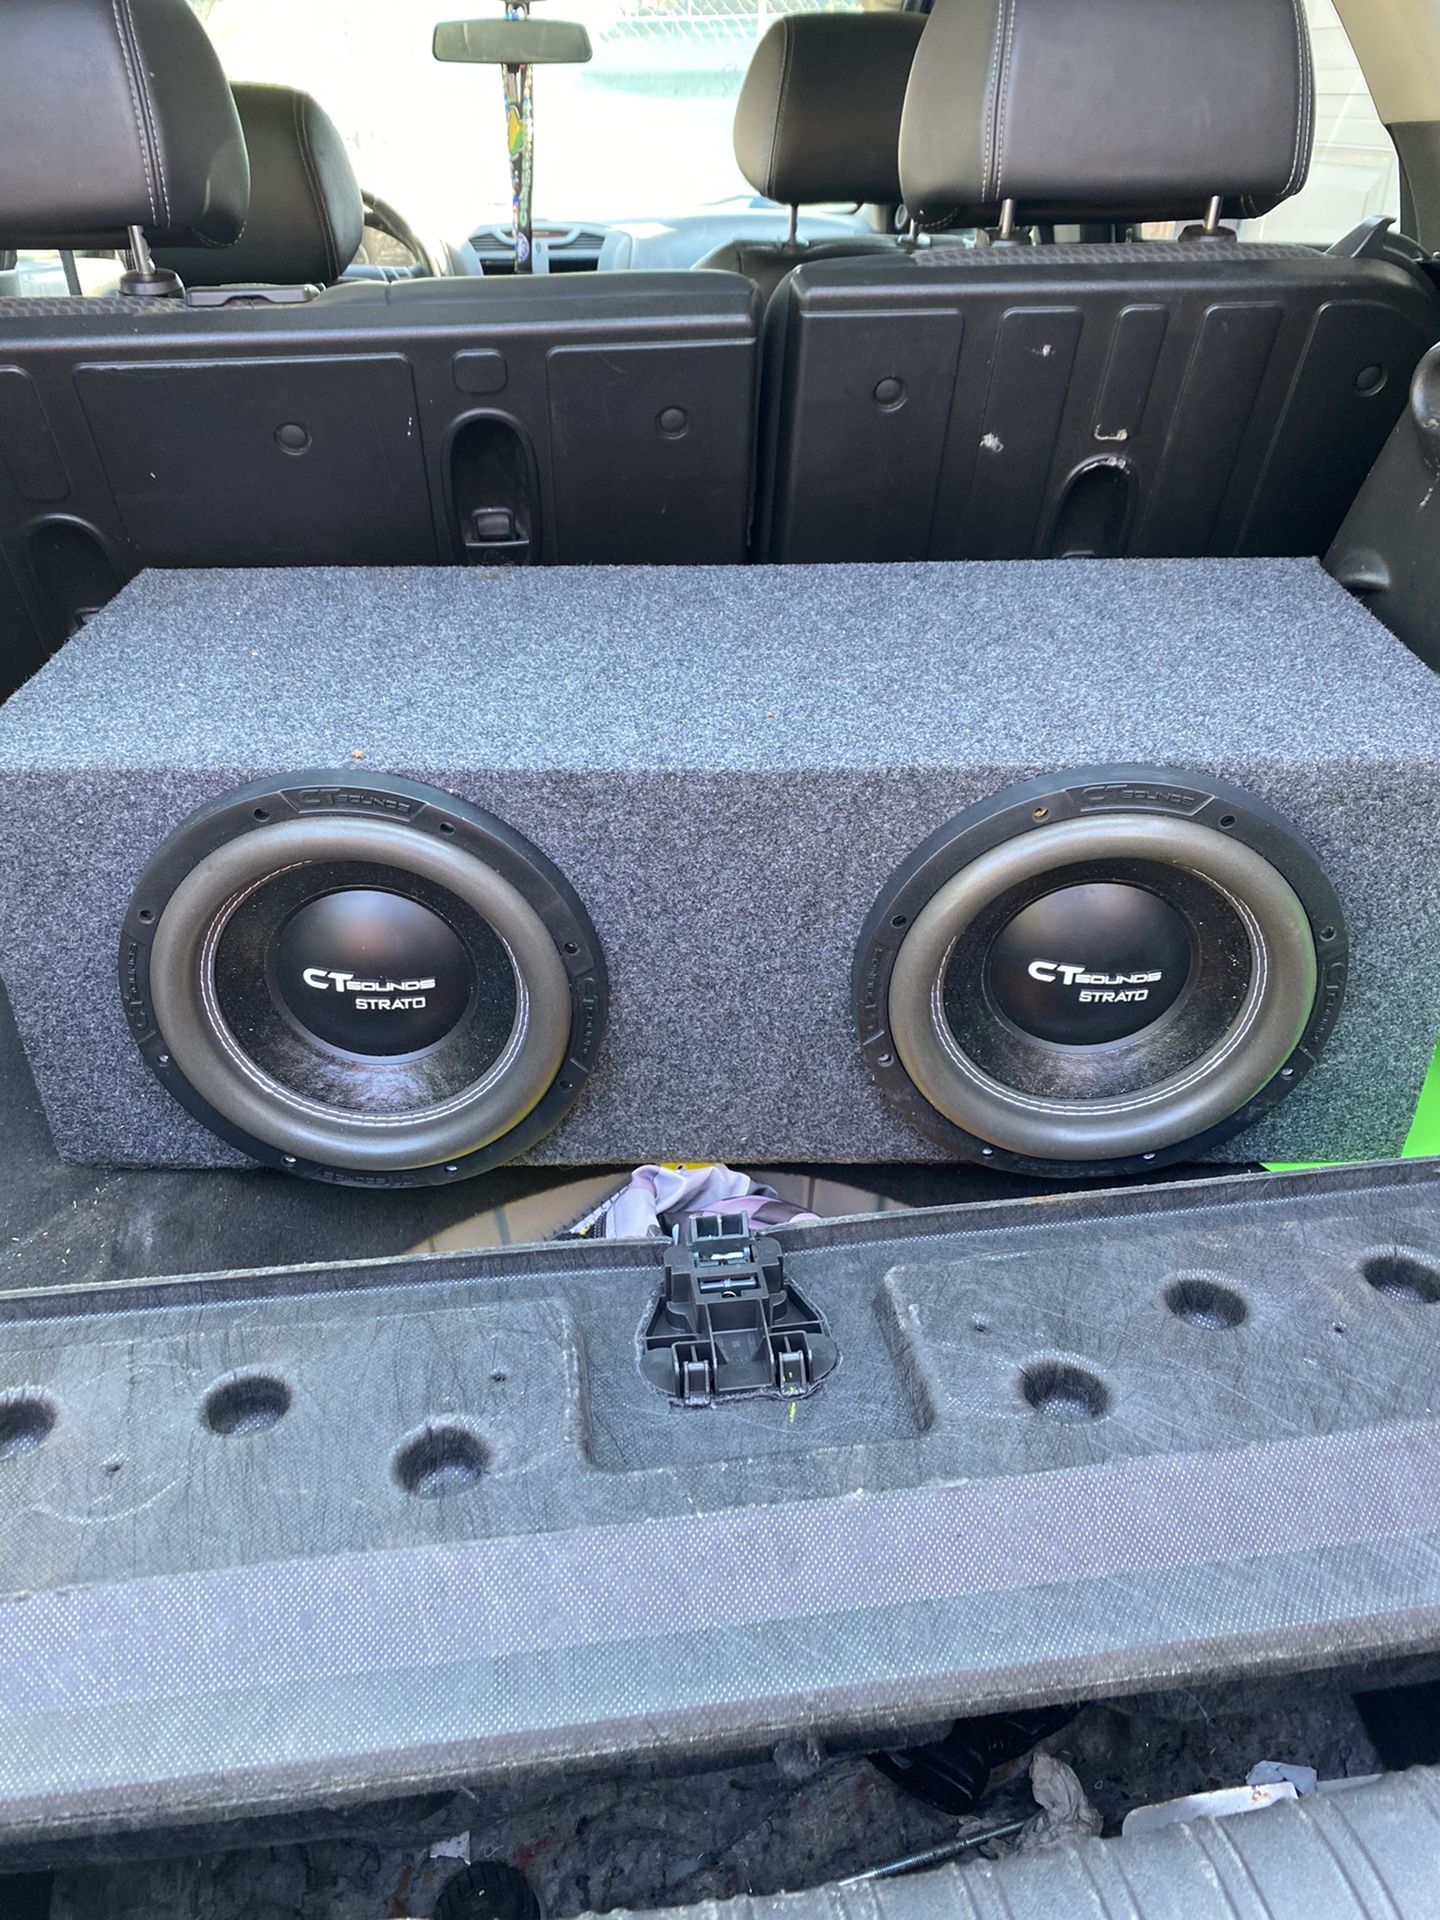 2 10” subs in box